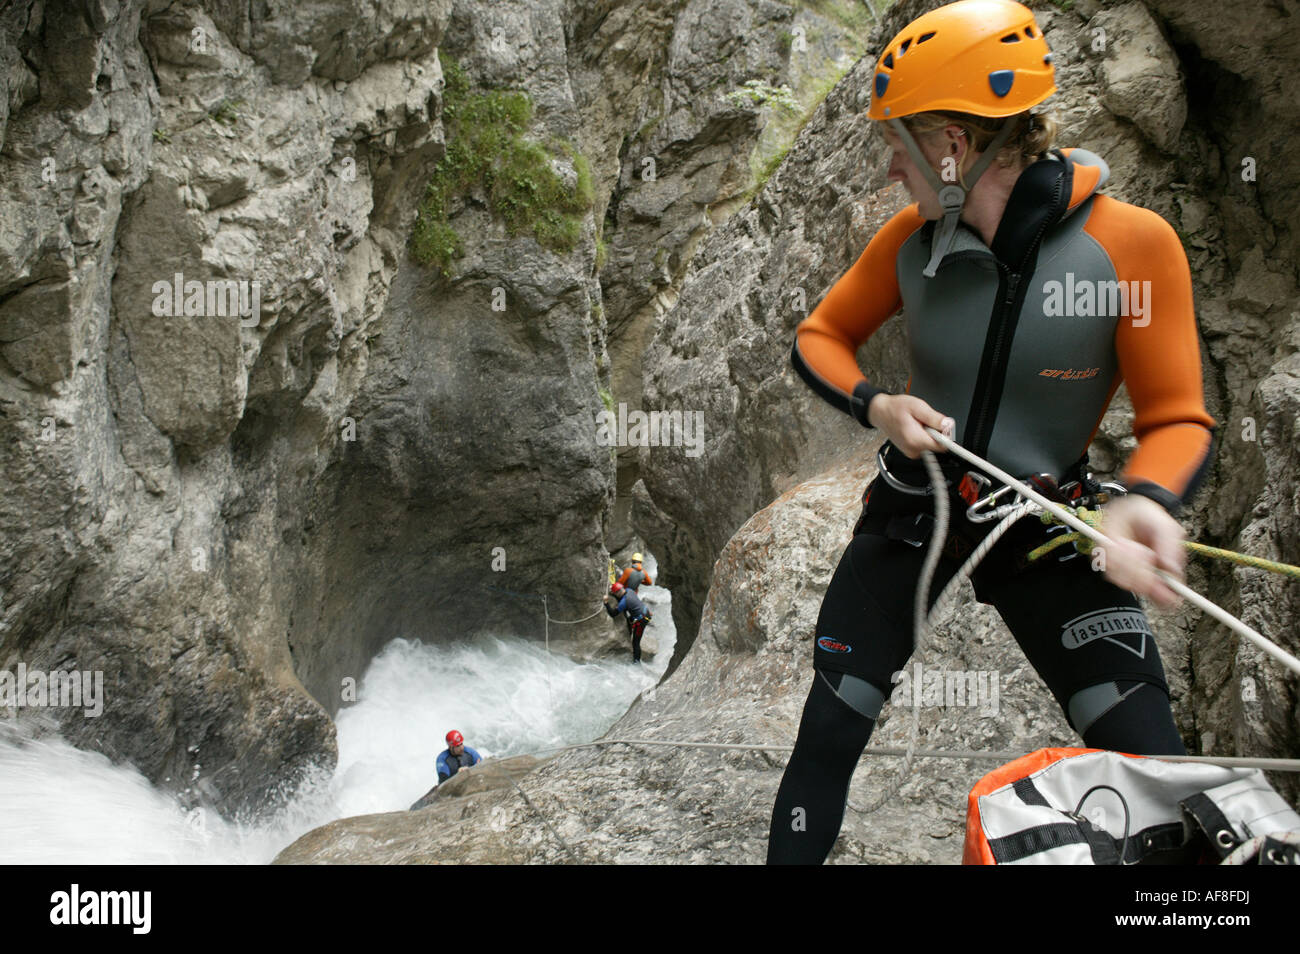 A group of people canyoning with guide, abseiling, Hachleschlucht, Haiming, Tyrol, Austria Stock Photo